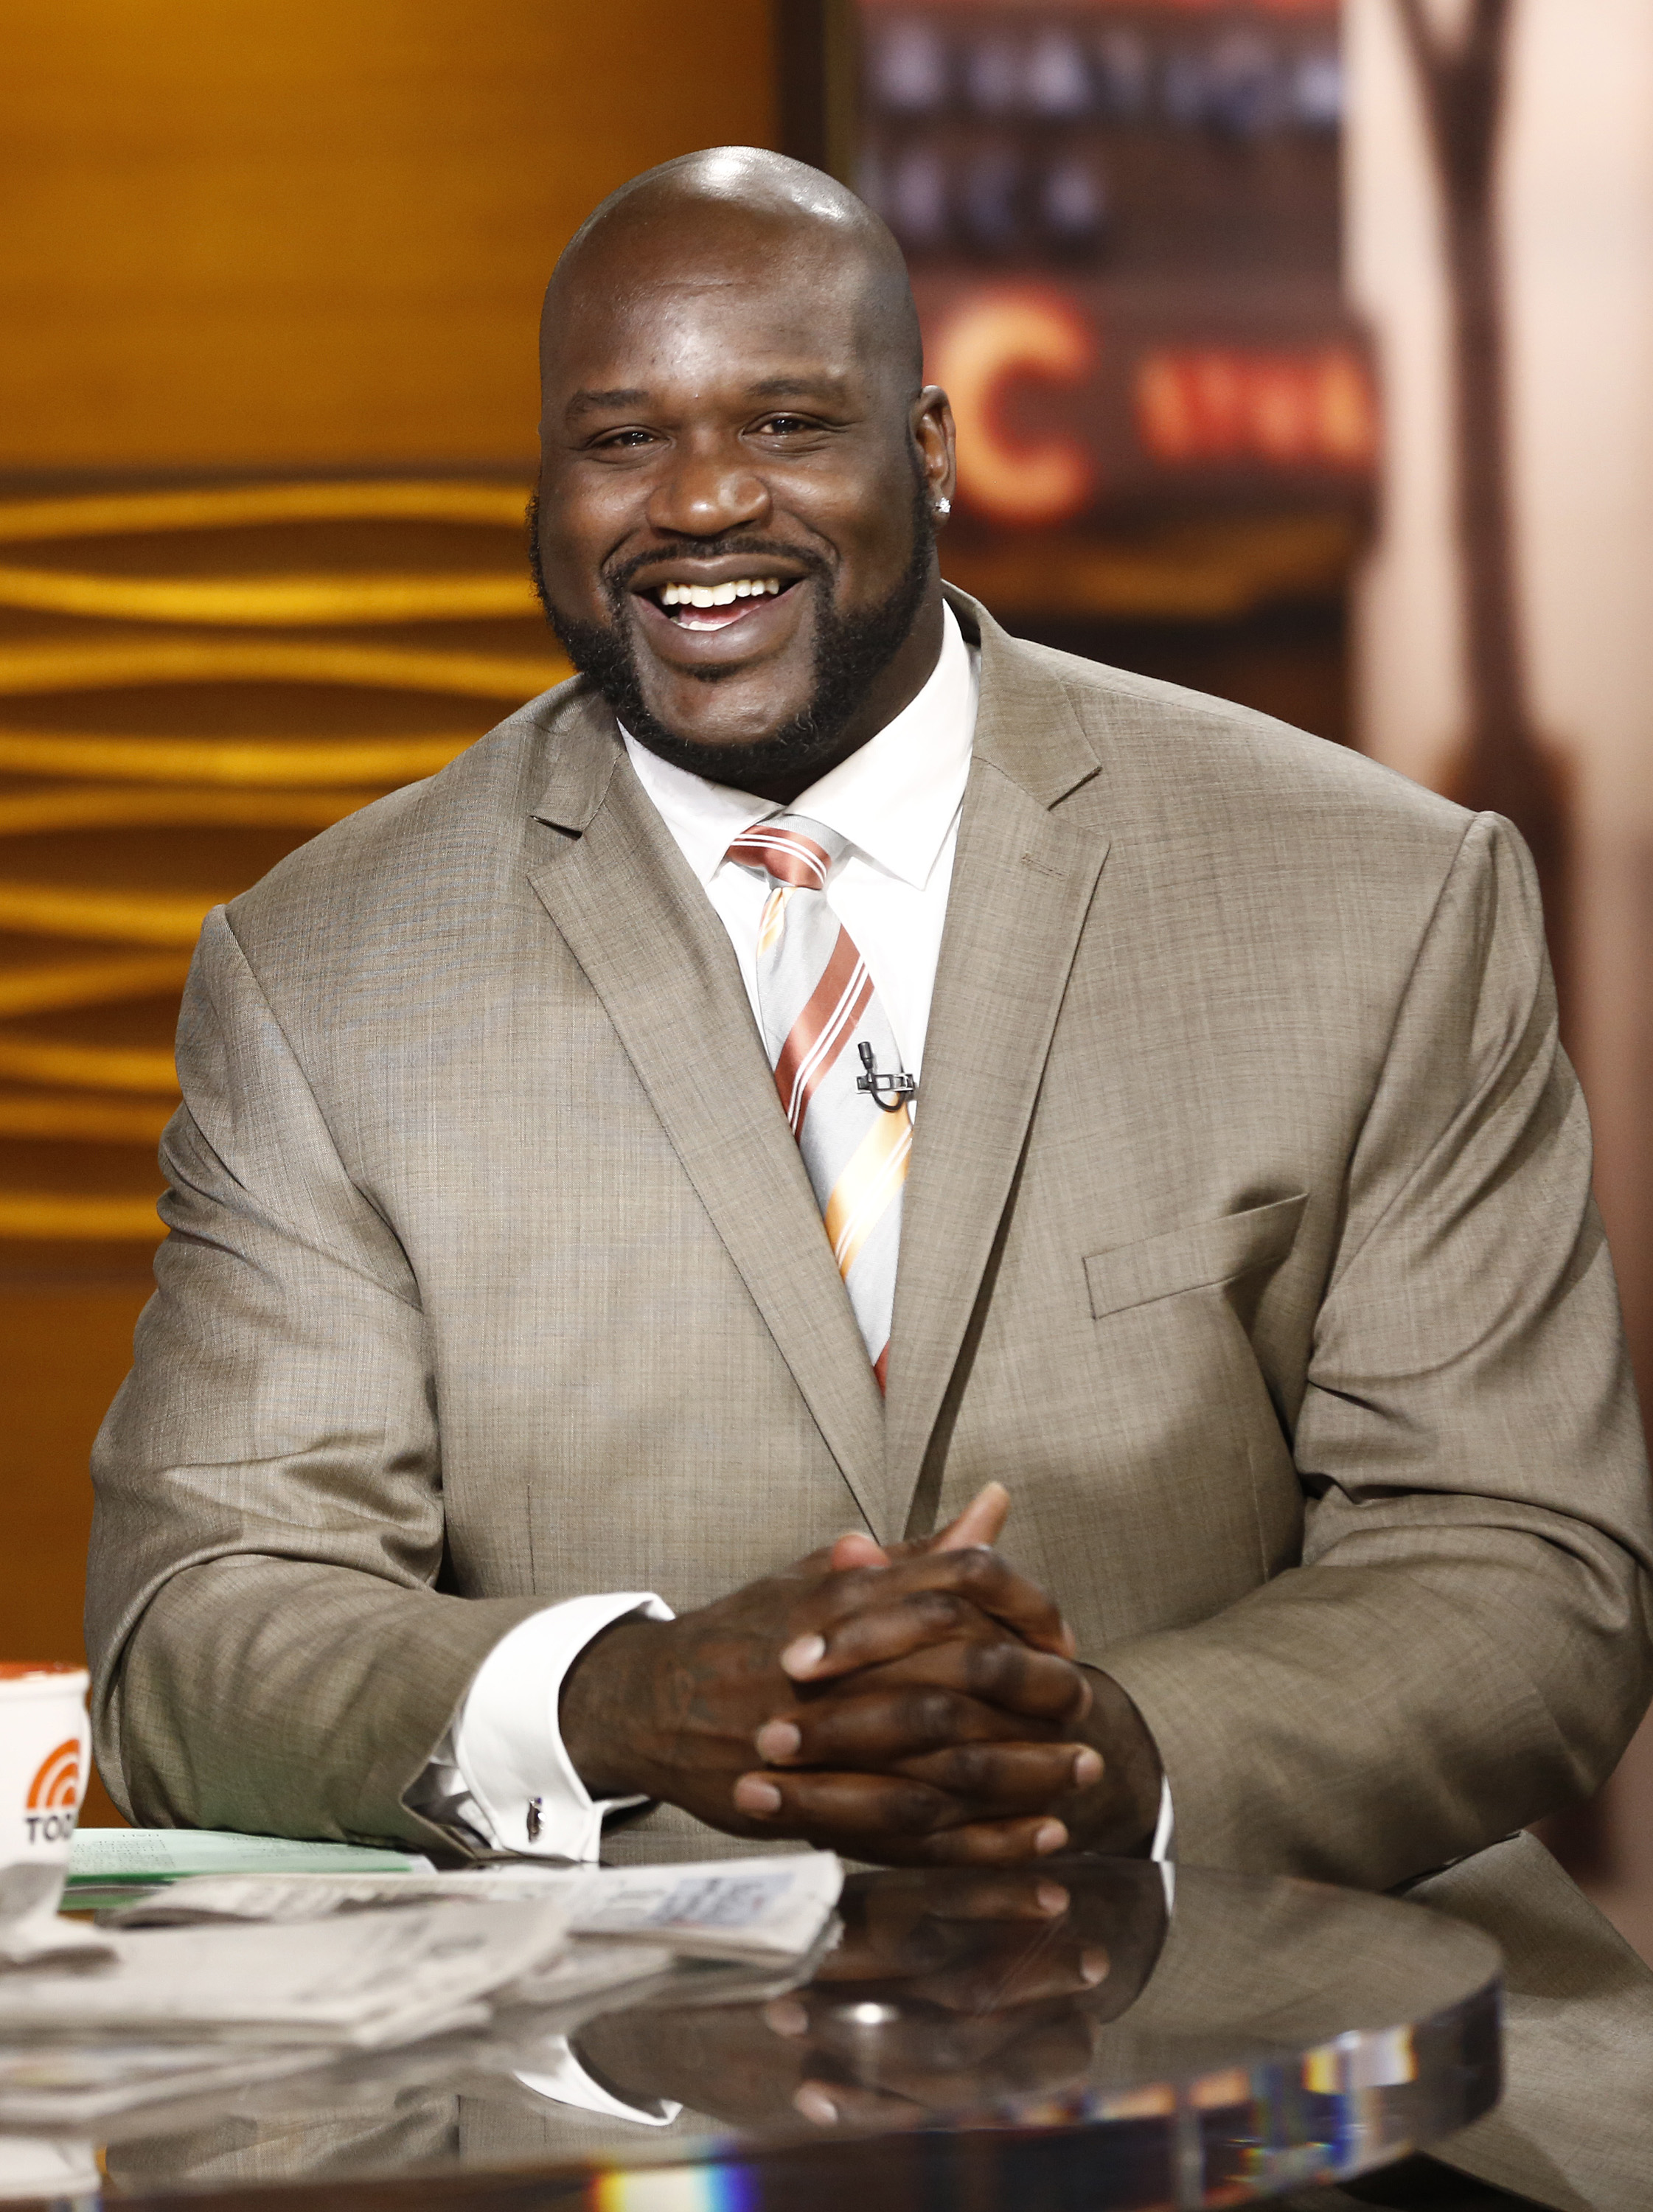 Shaquille O'Neal appears on NBC News' "Today" show